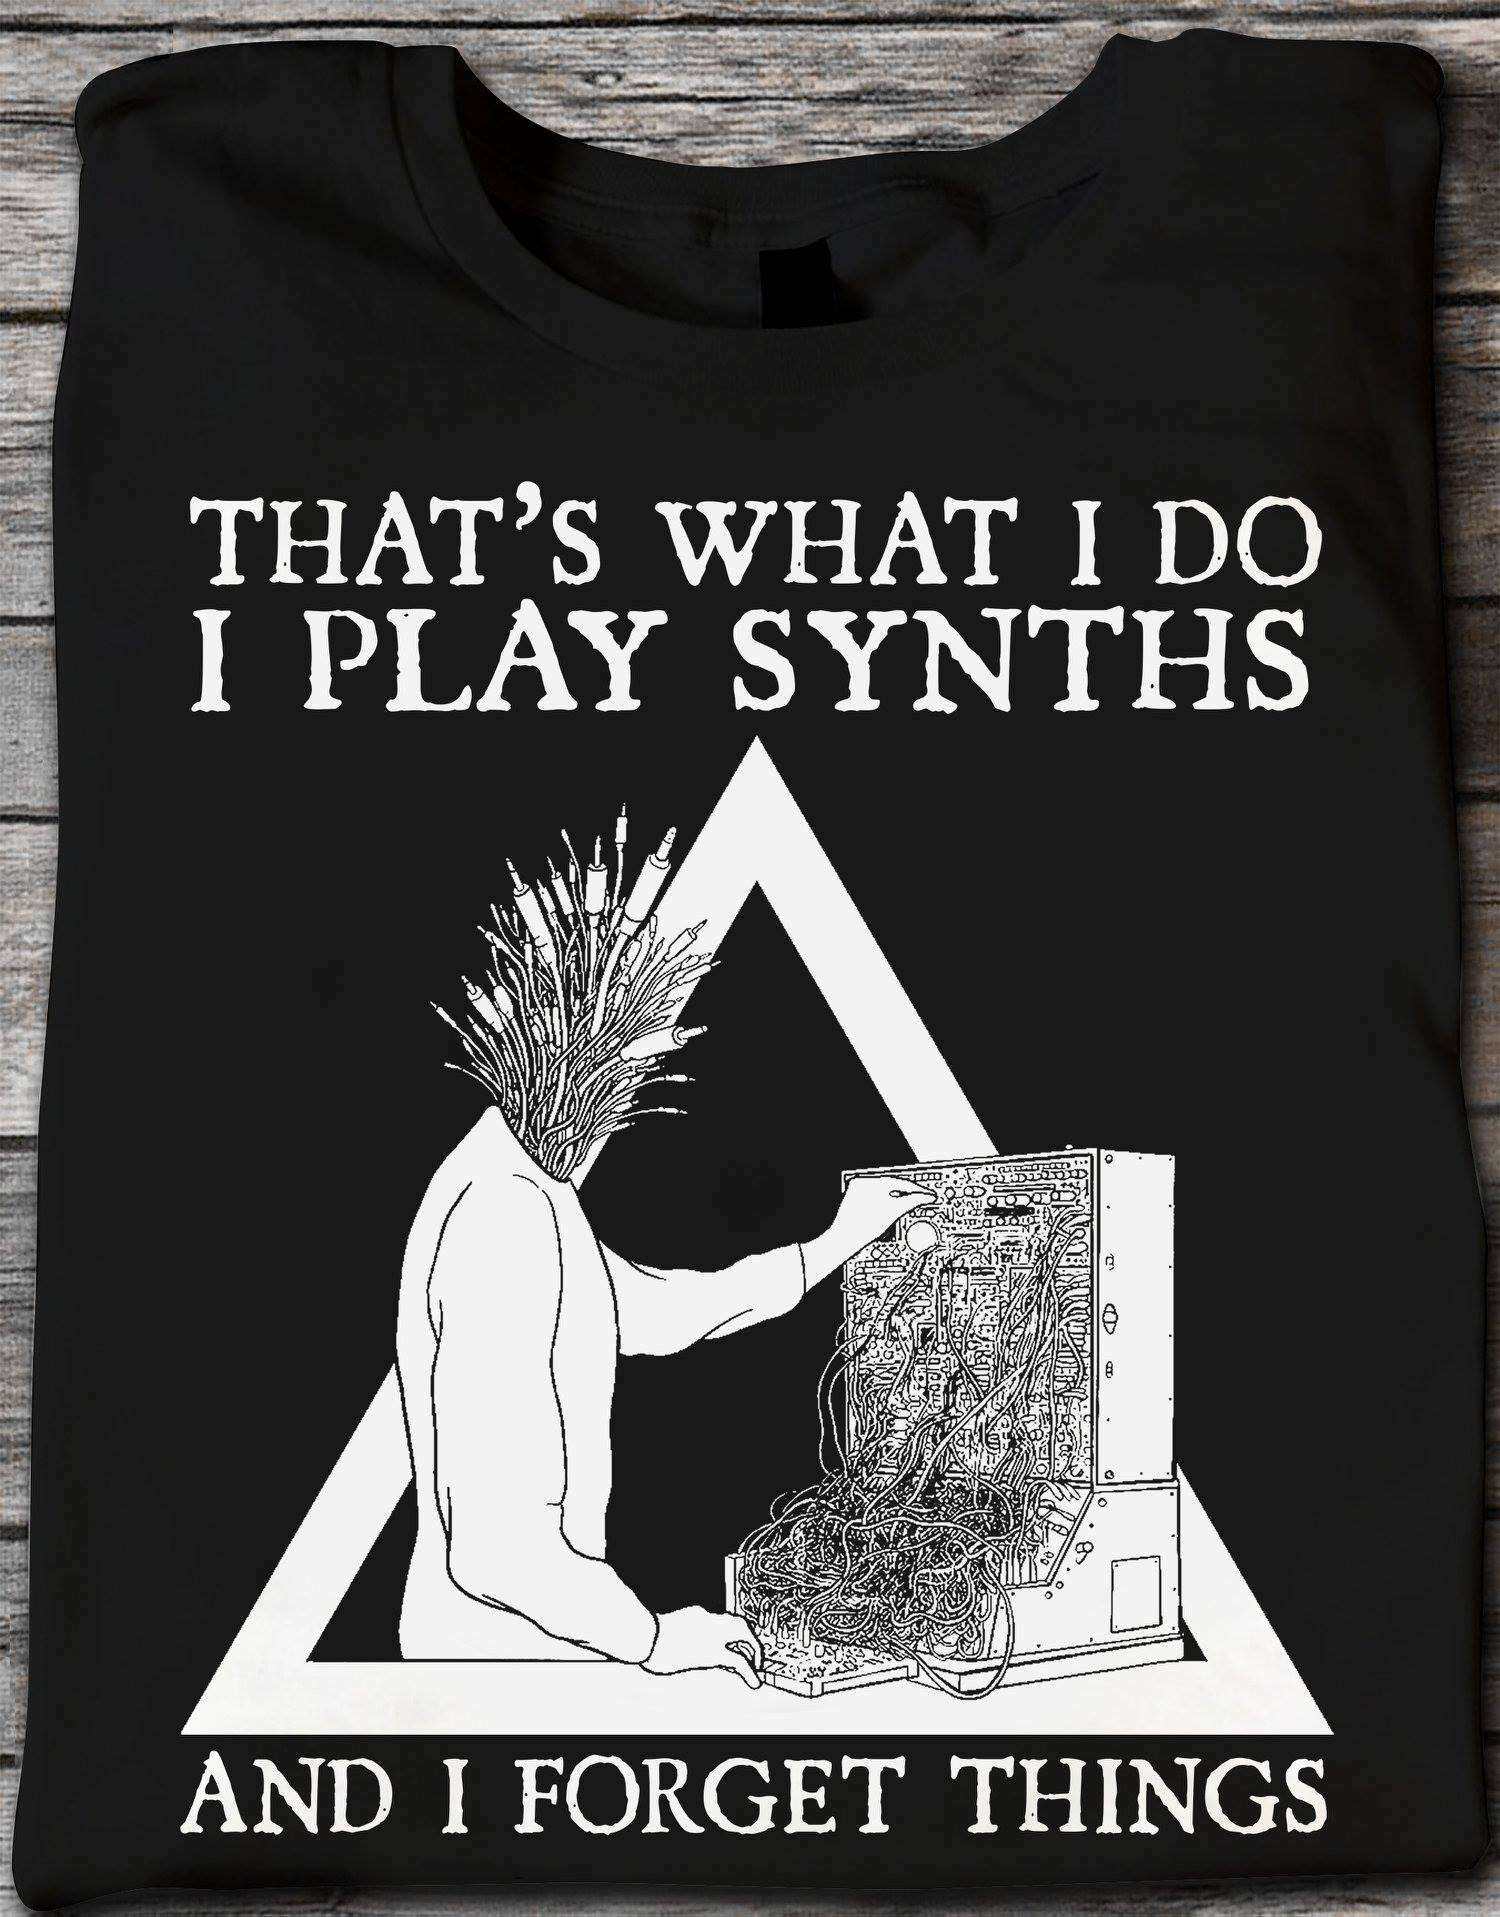 That's what I do I play synths and I forget things - Music beat maker, play synth artist